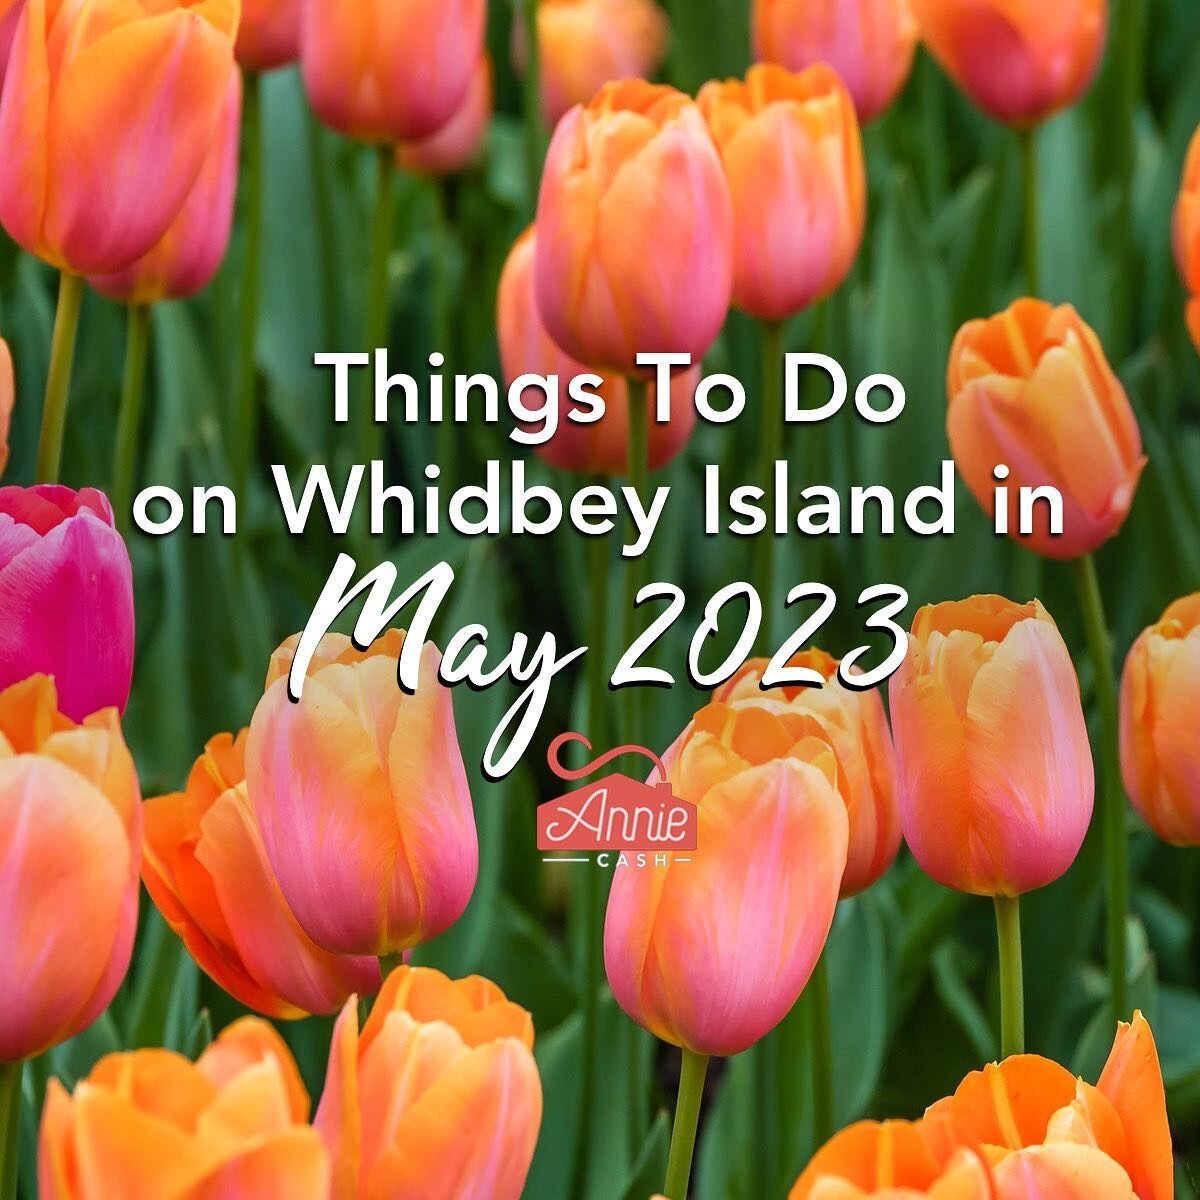 Happy May! 🌷☀️ This month brings us so many fun + festive things to do and see on #WhidbeyIsland! 

✨ For a full calendar of May 2023 events, follow my link in bio! ✨

#whidbeyisland #whidbey #whidbeylife #oakharbor #oakharborwa #whidbeyislandreales